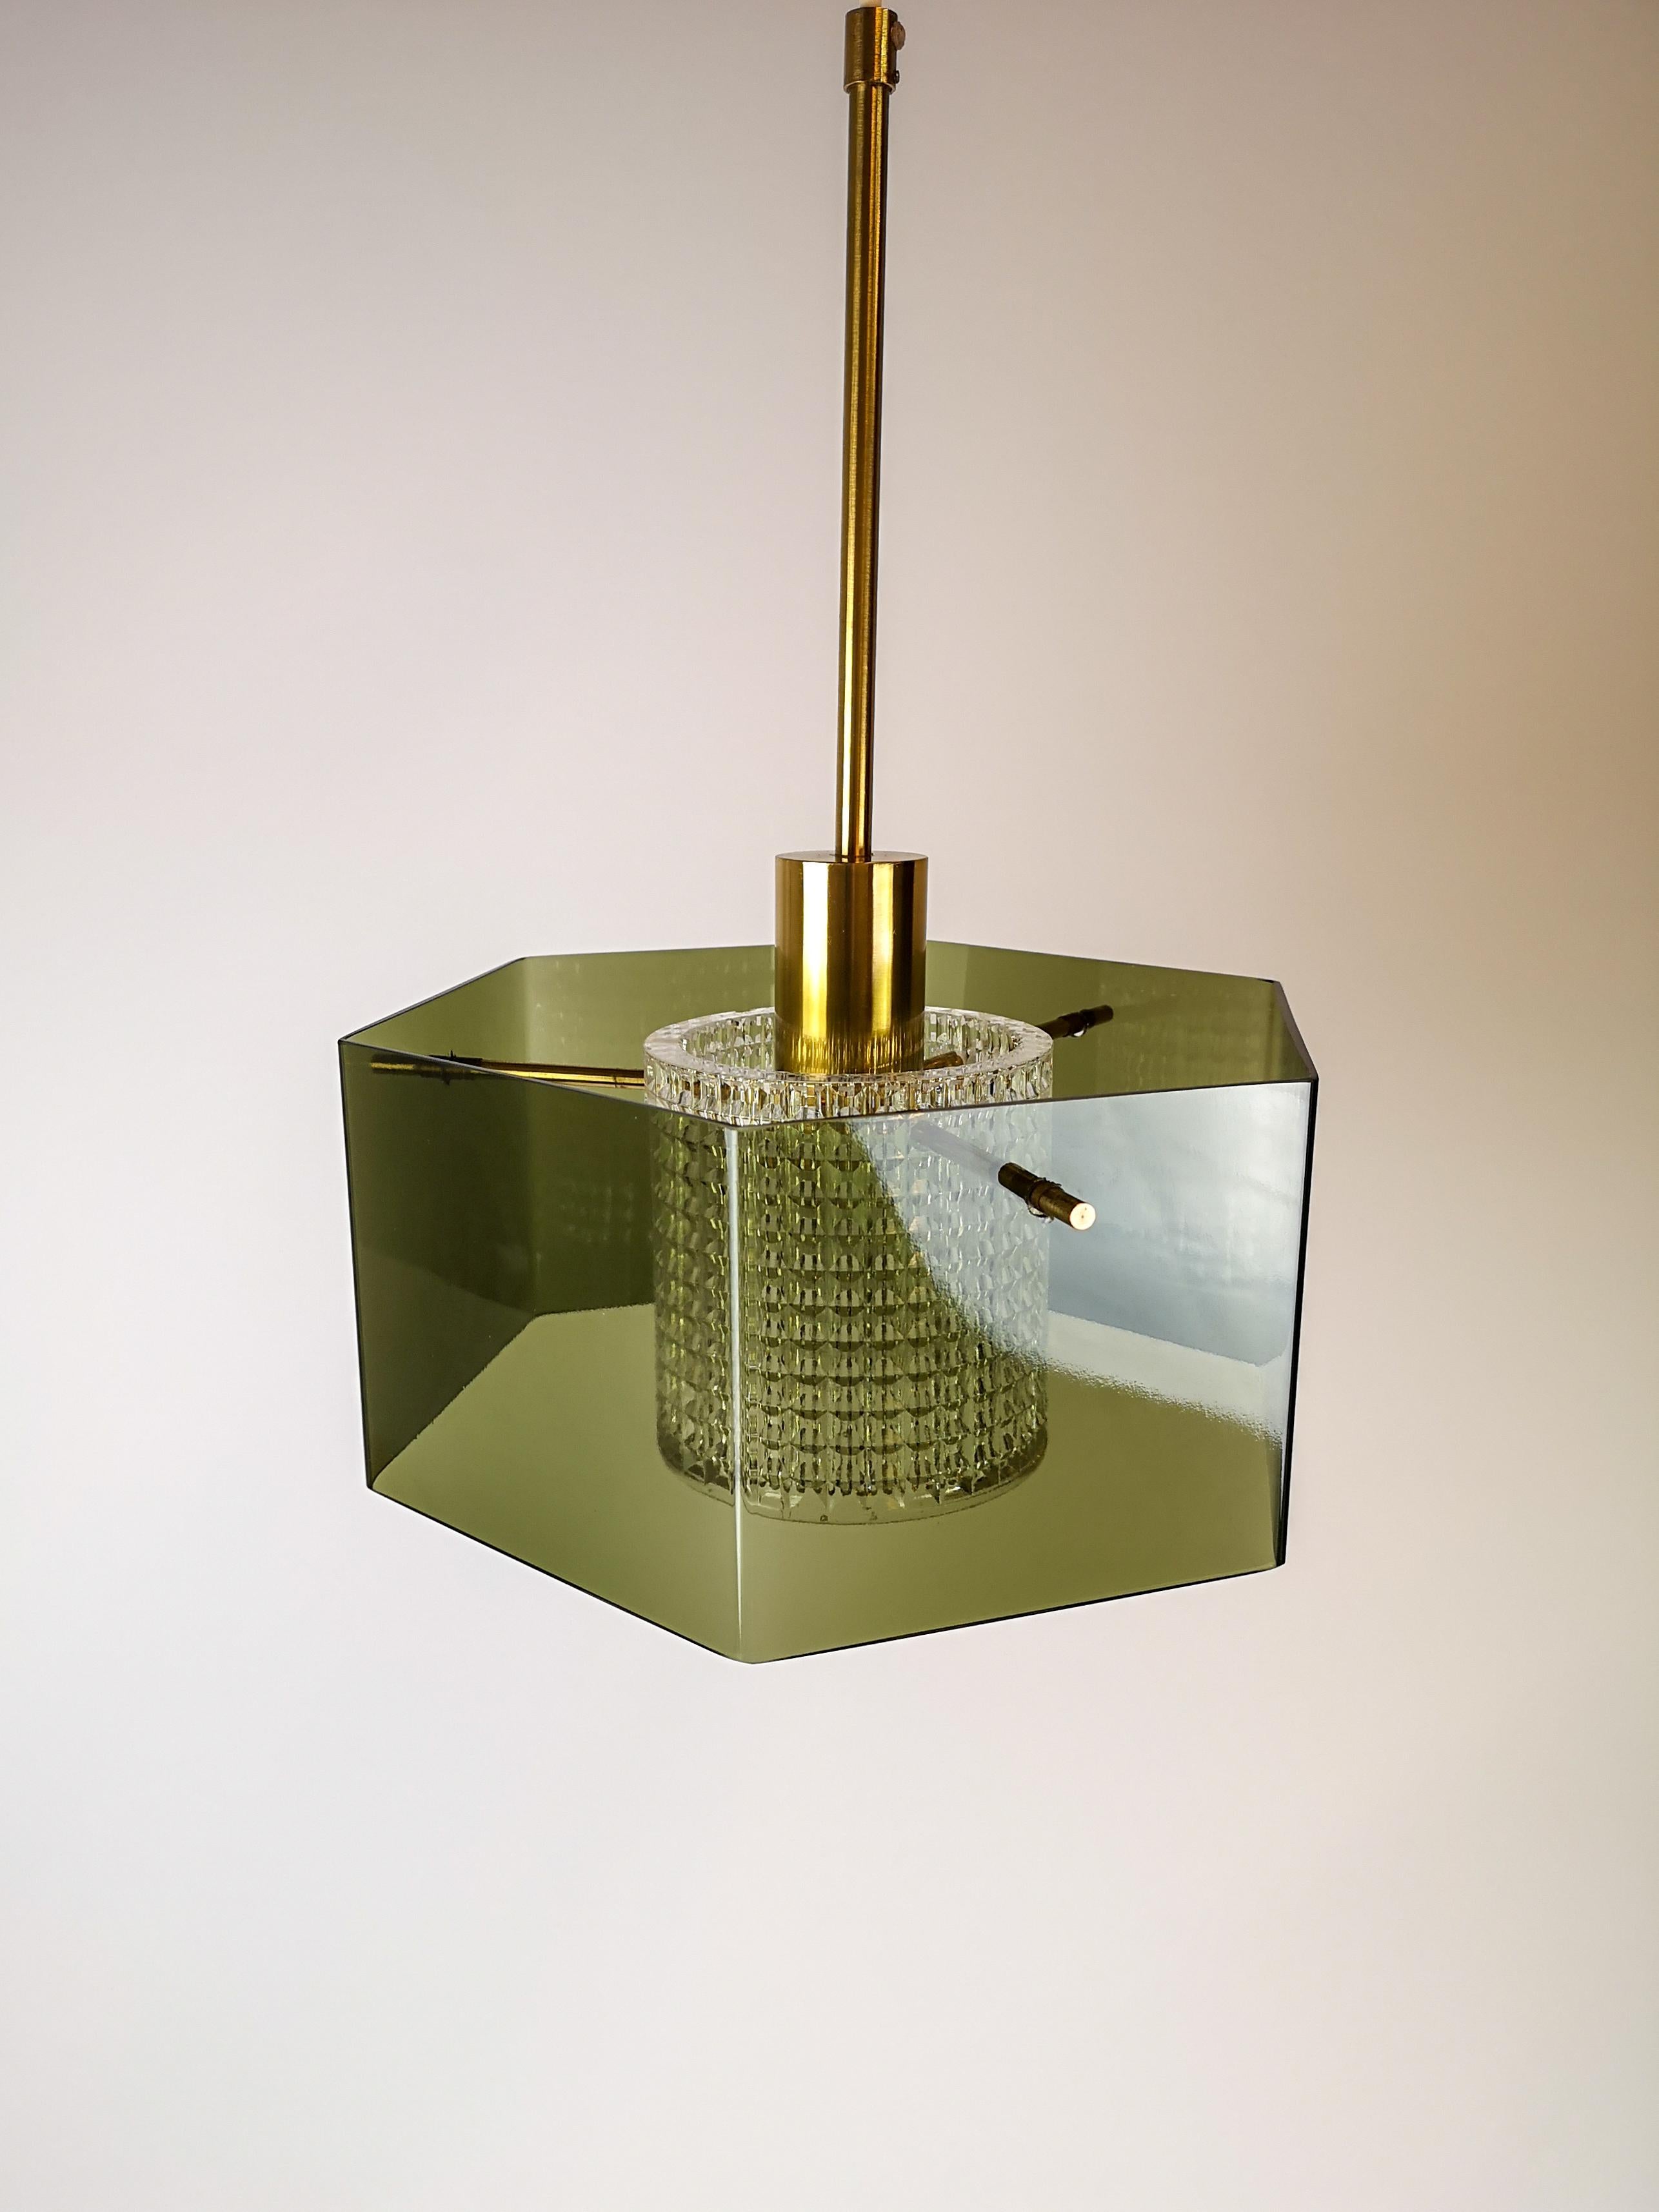 Well-made ceiling light with hand blown green glass. Nice details of brass and clear crystal glass cylinder.
Designed by Carl Fagerlund and manufactured by Orrefors circa 1960s-1970s.

The lamp is in very good vintage condition with minor wear